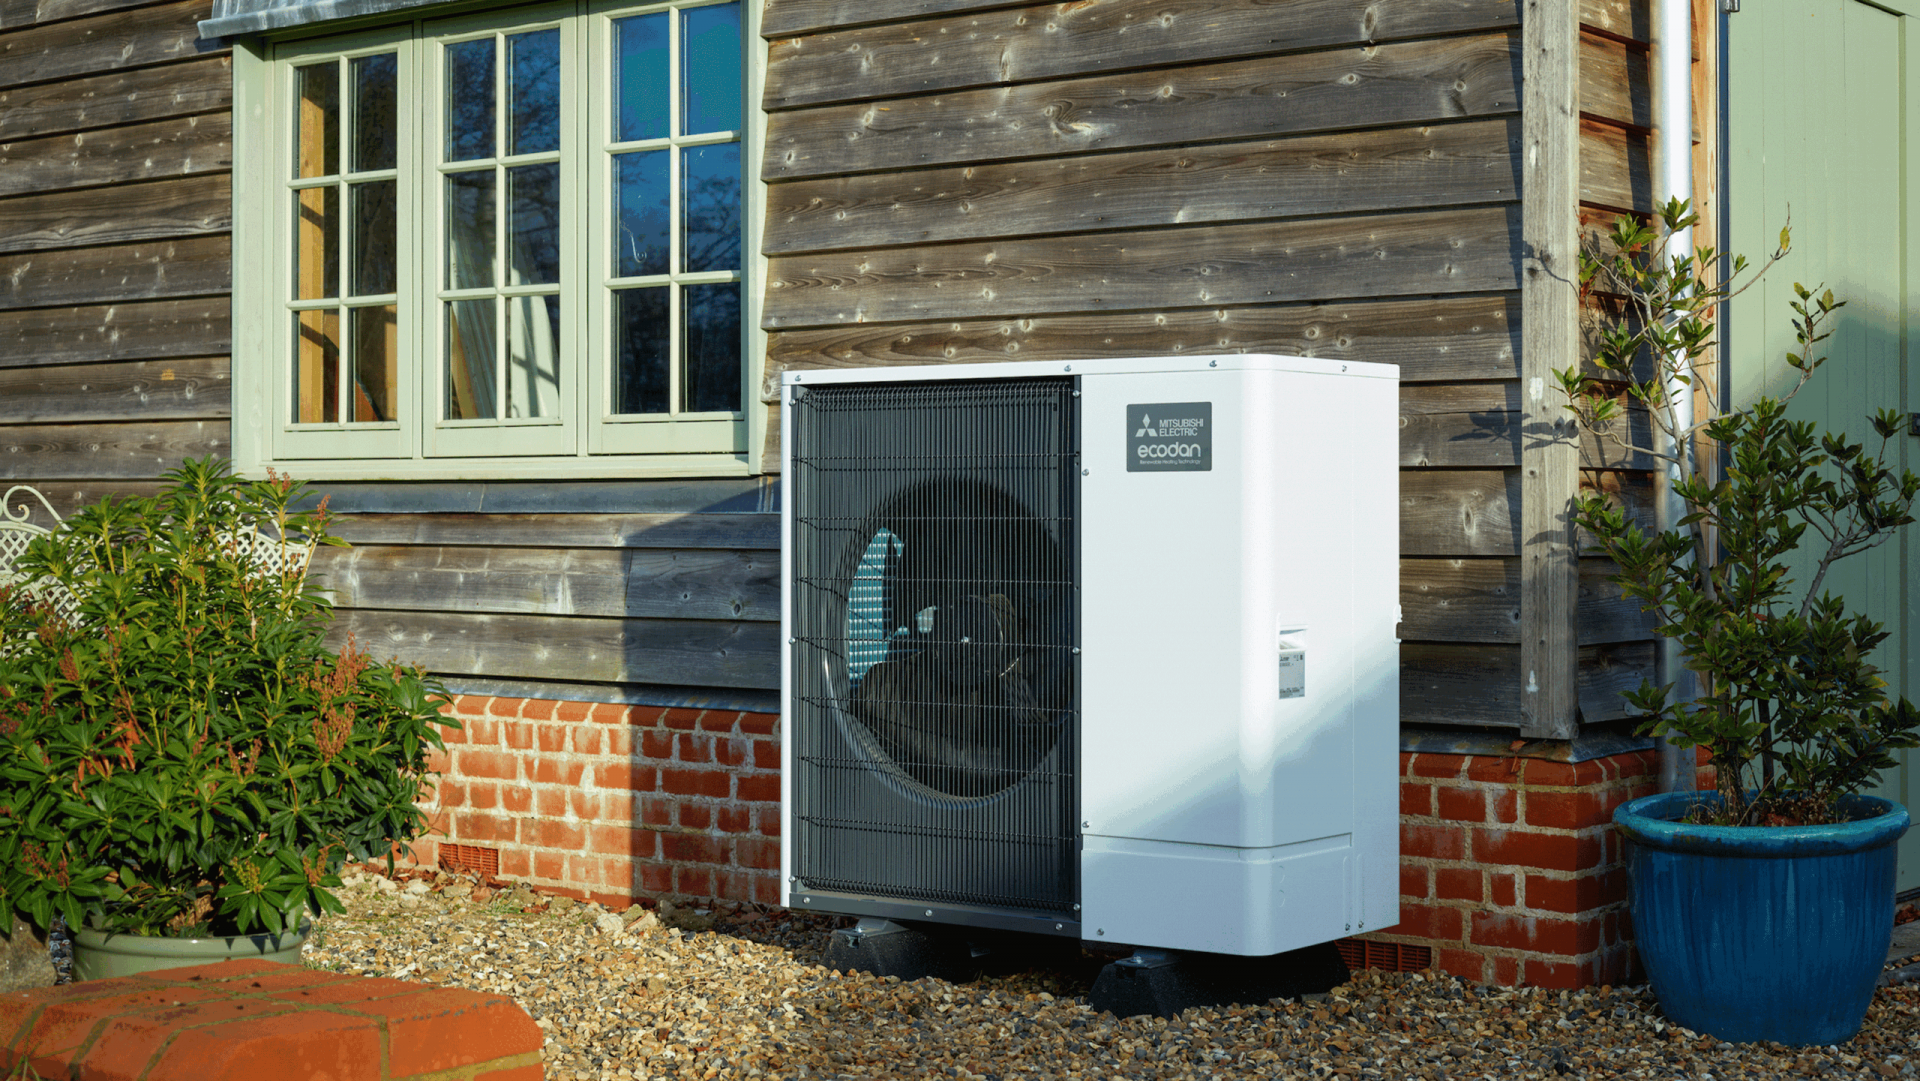 The ground source heat pump grants available for homeowners in 2023